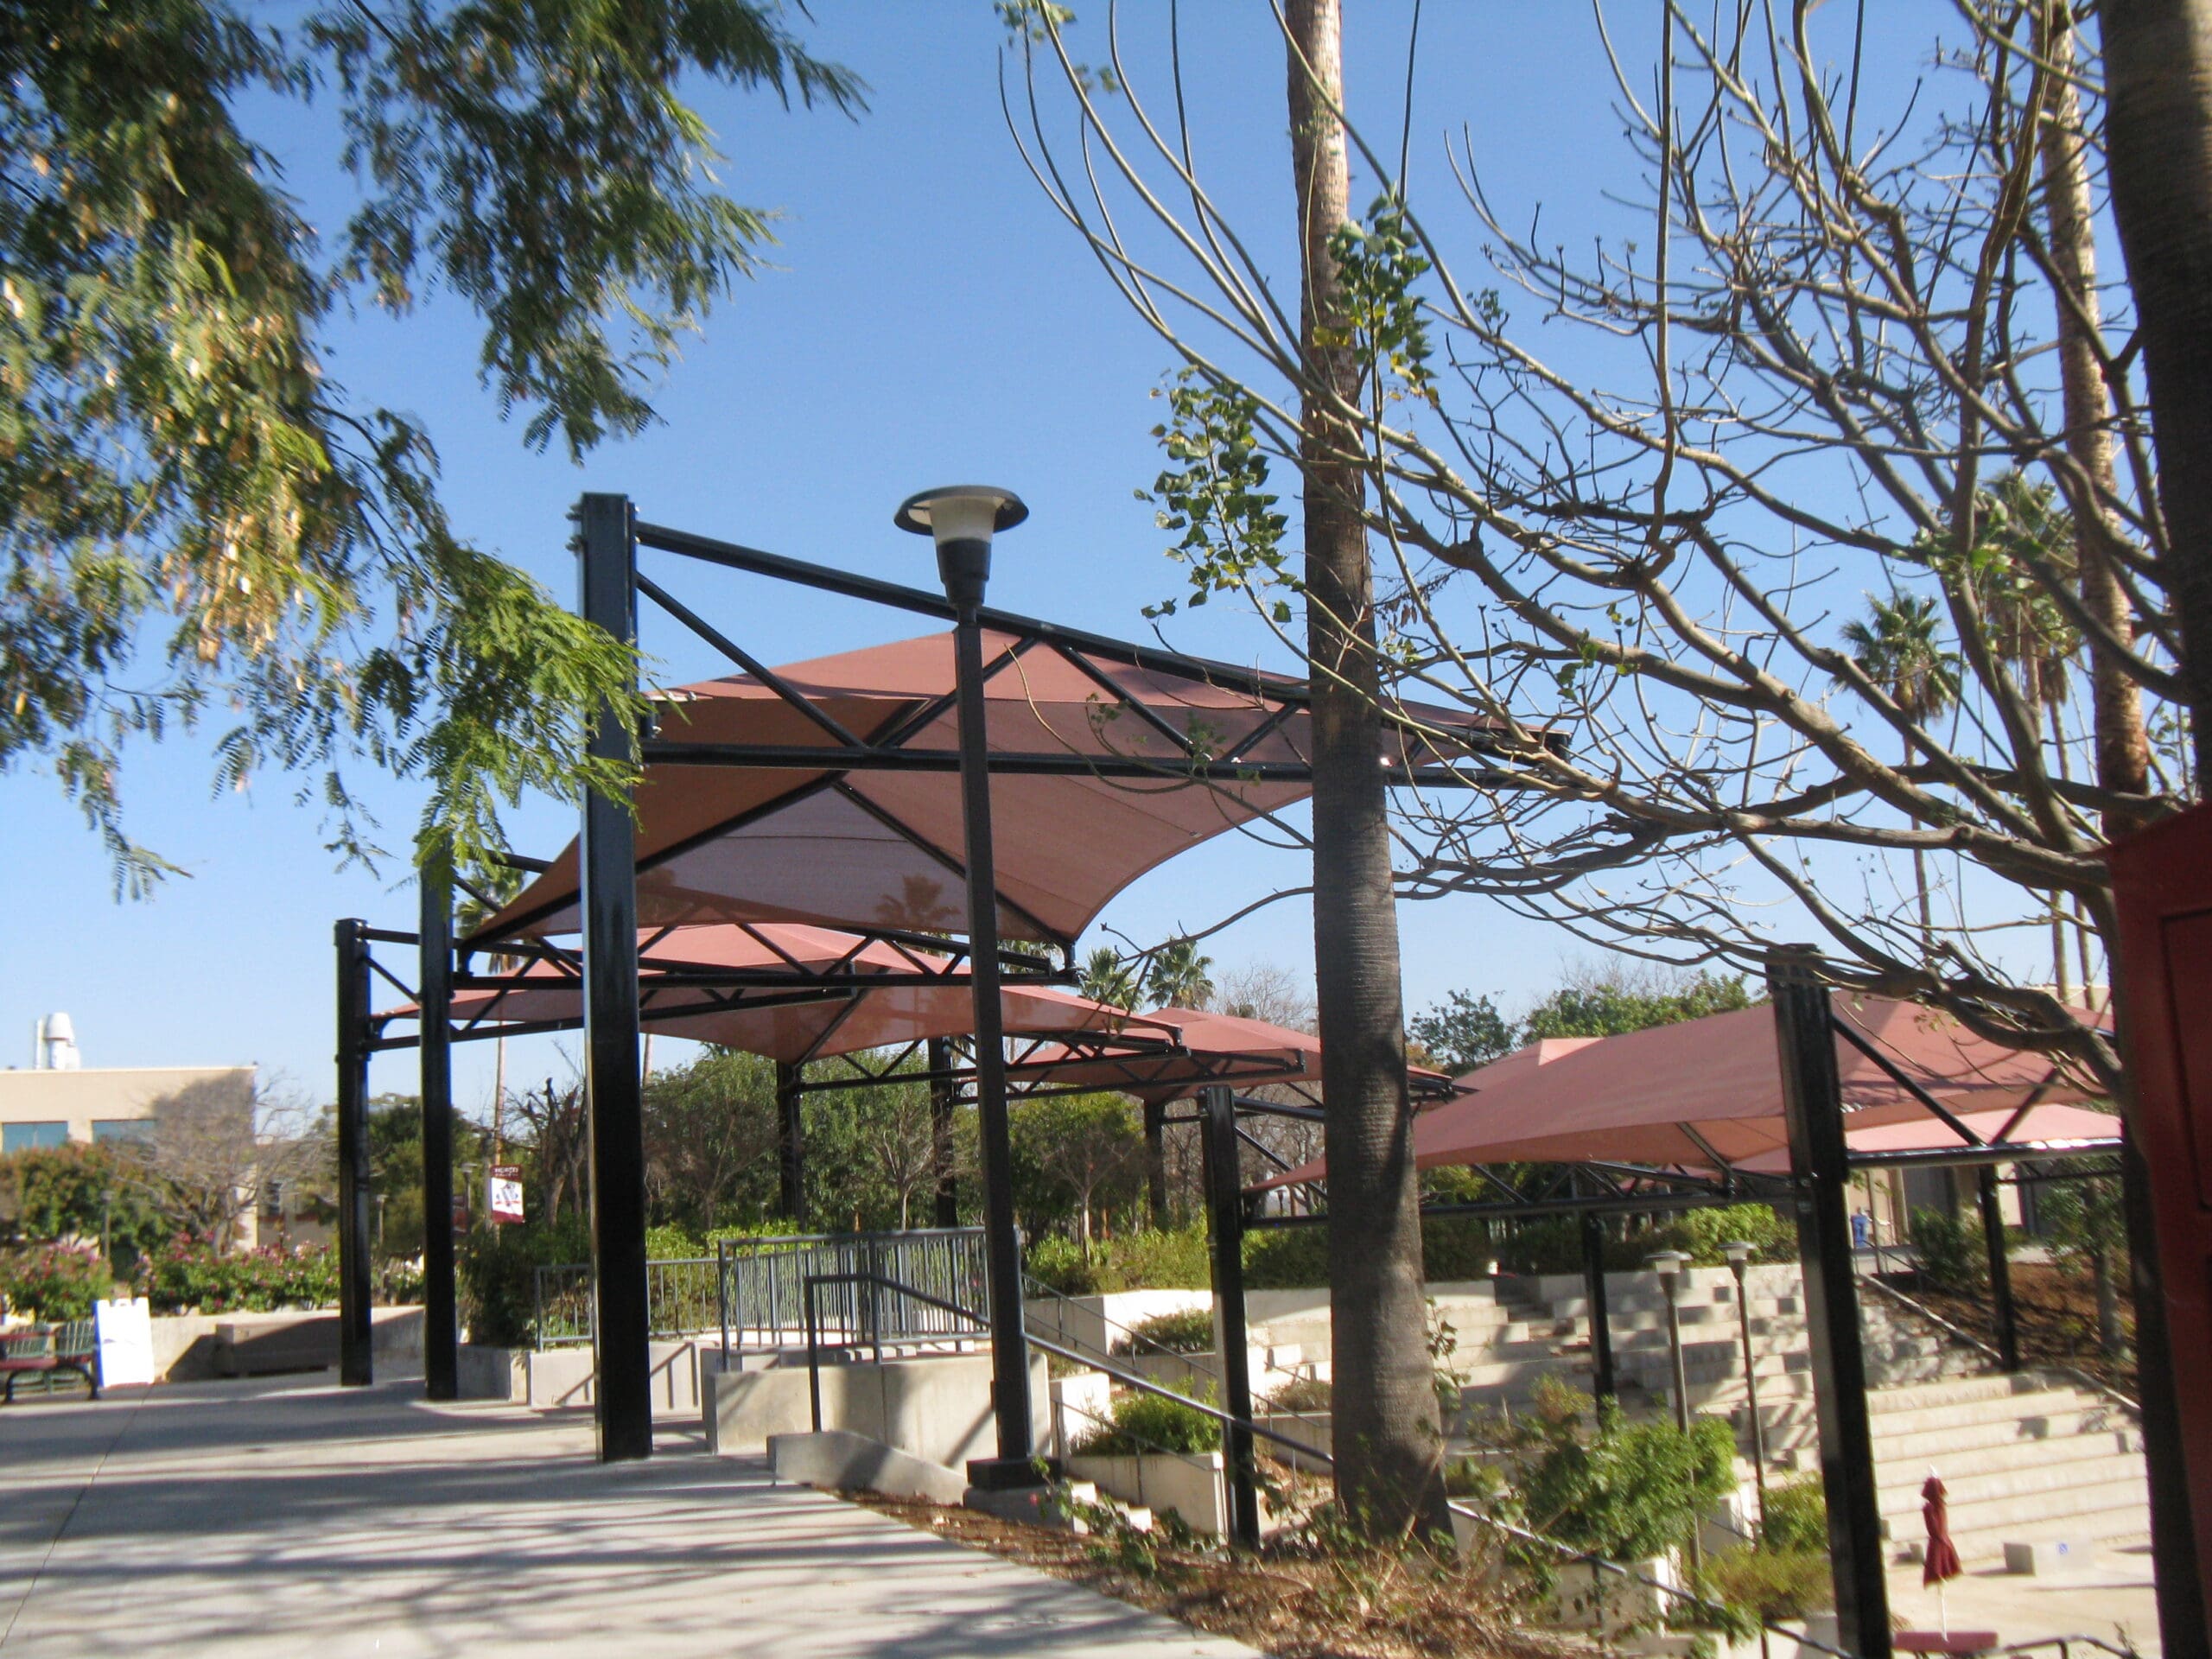 shades covering outdoor amphitheater